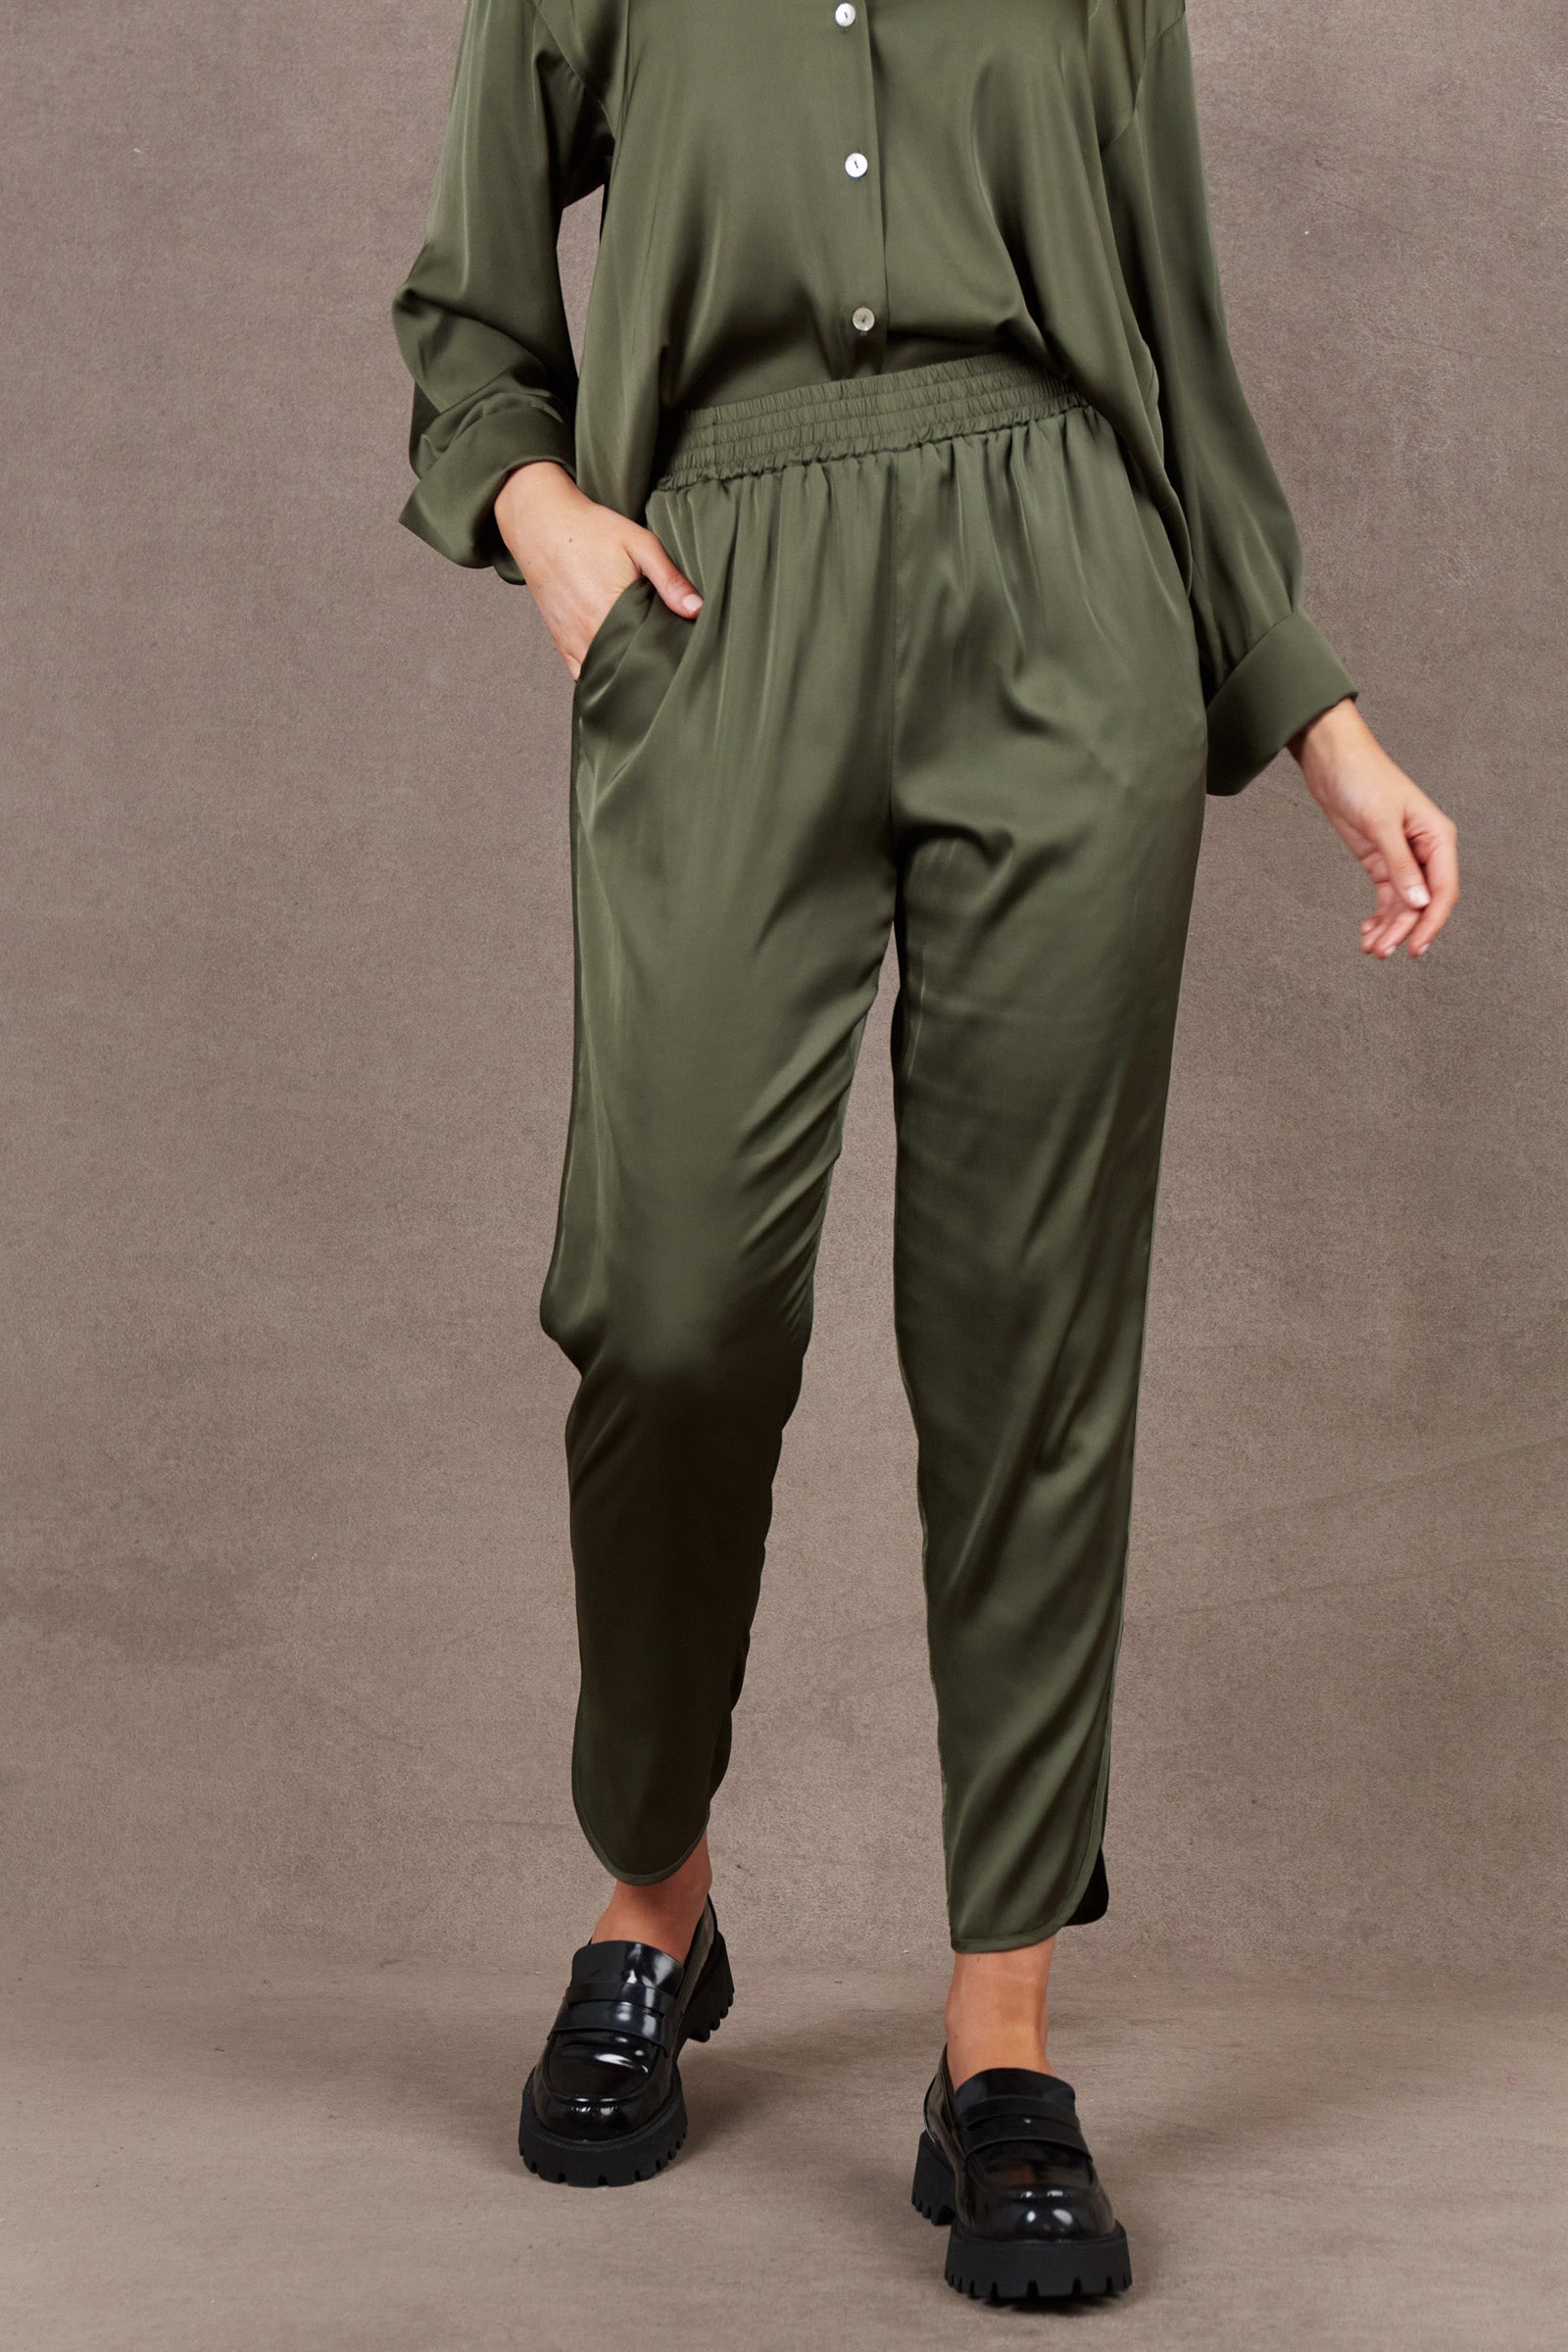 Norse Pant - Aspen - eb&ive Clothing - Pant Relaxed